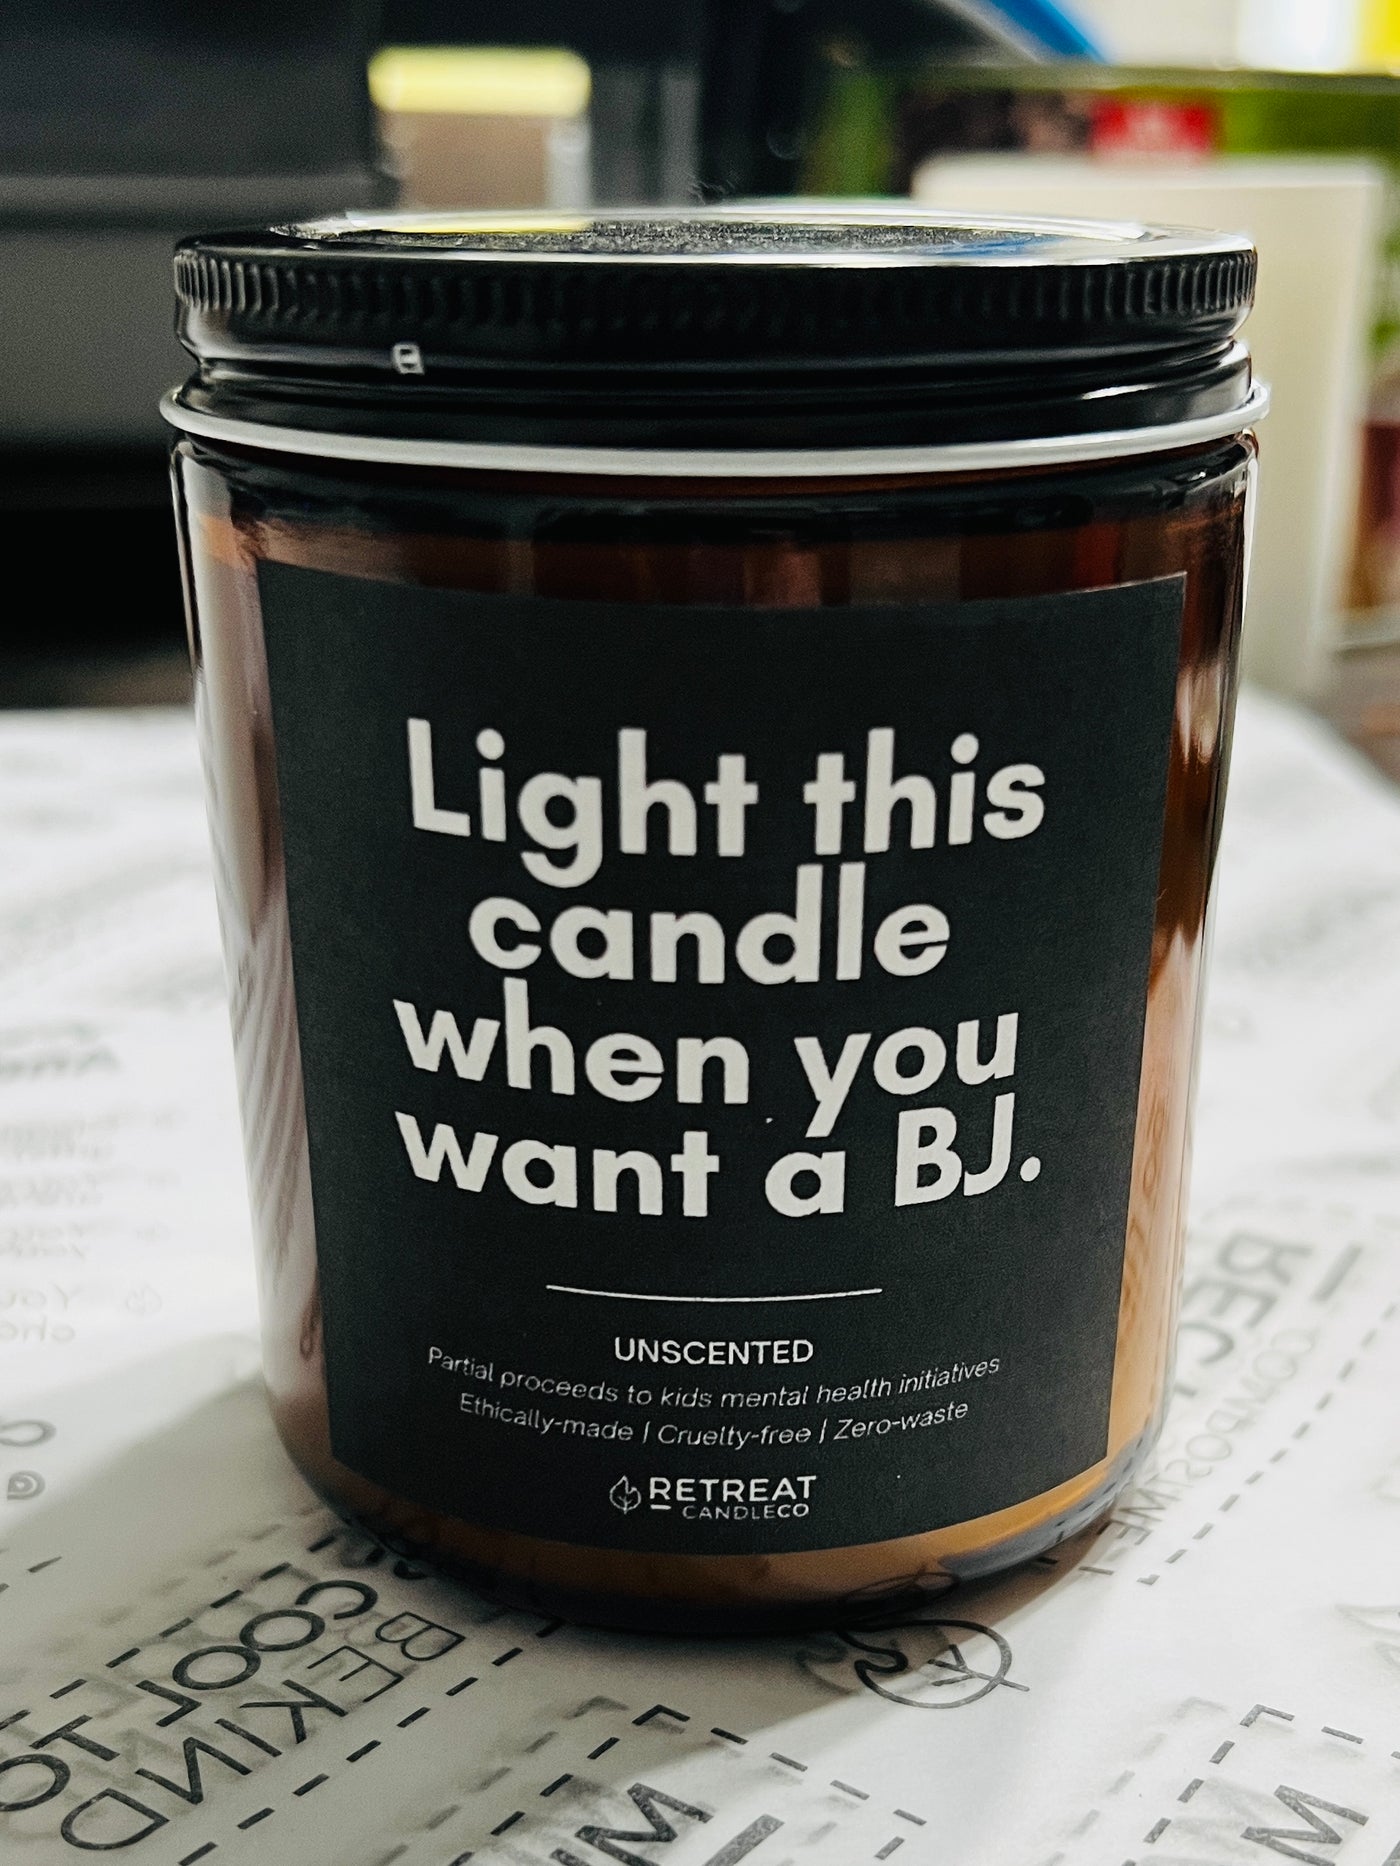 The BJ Candle